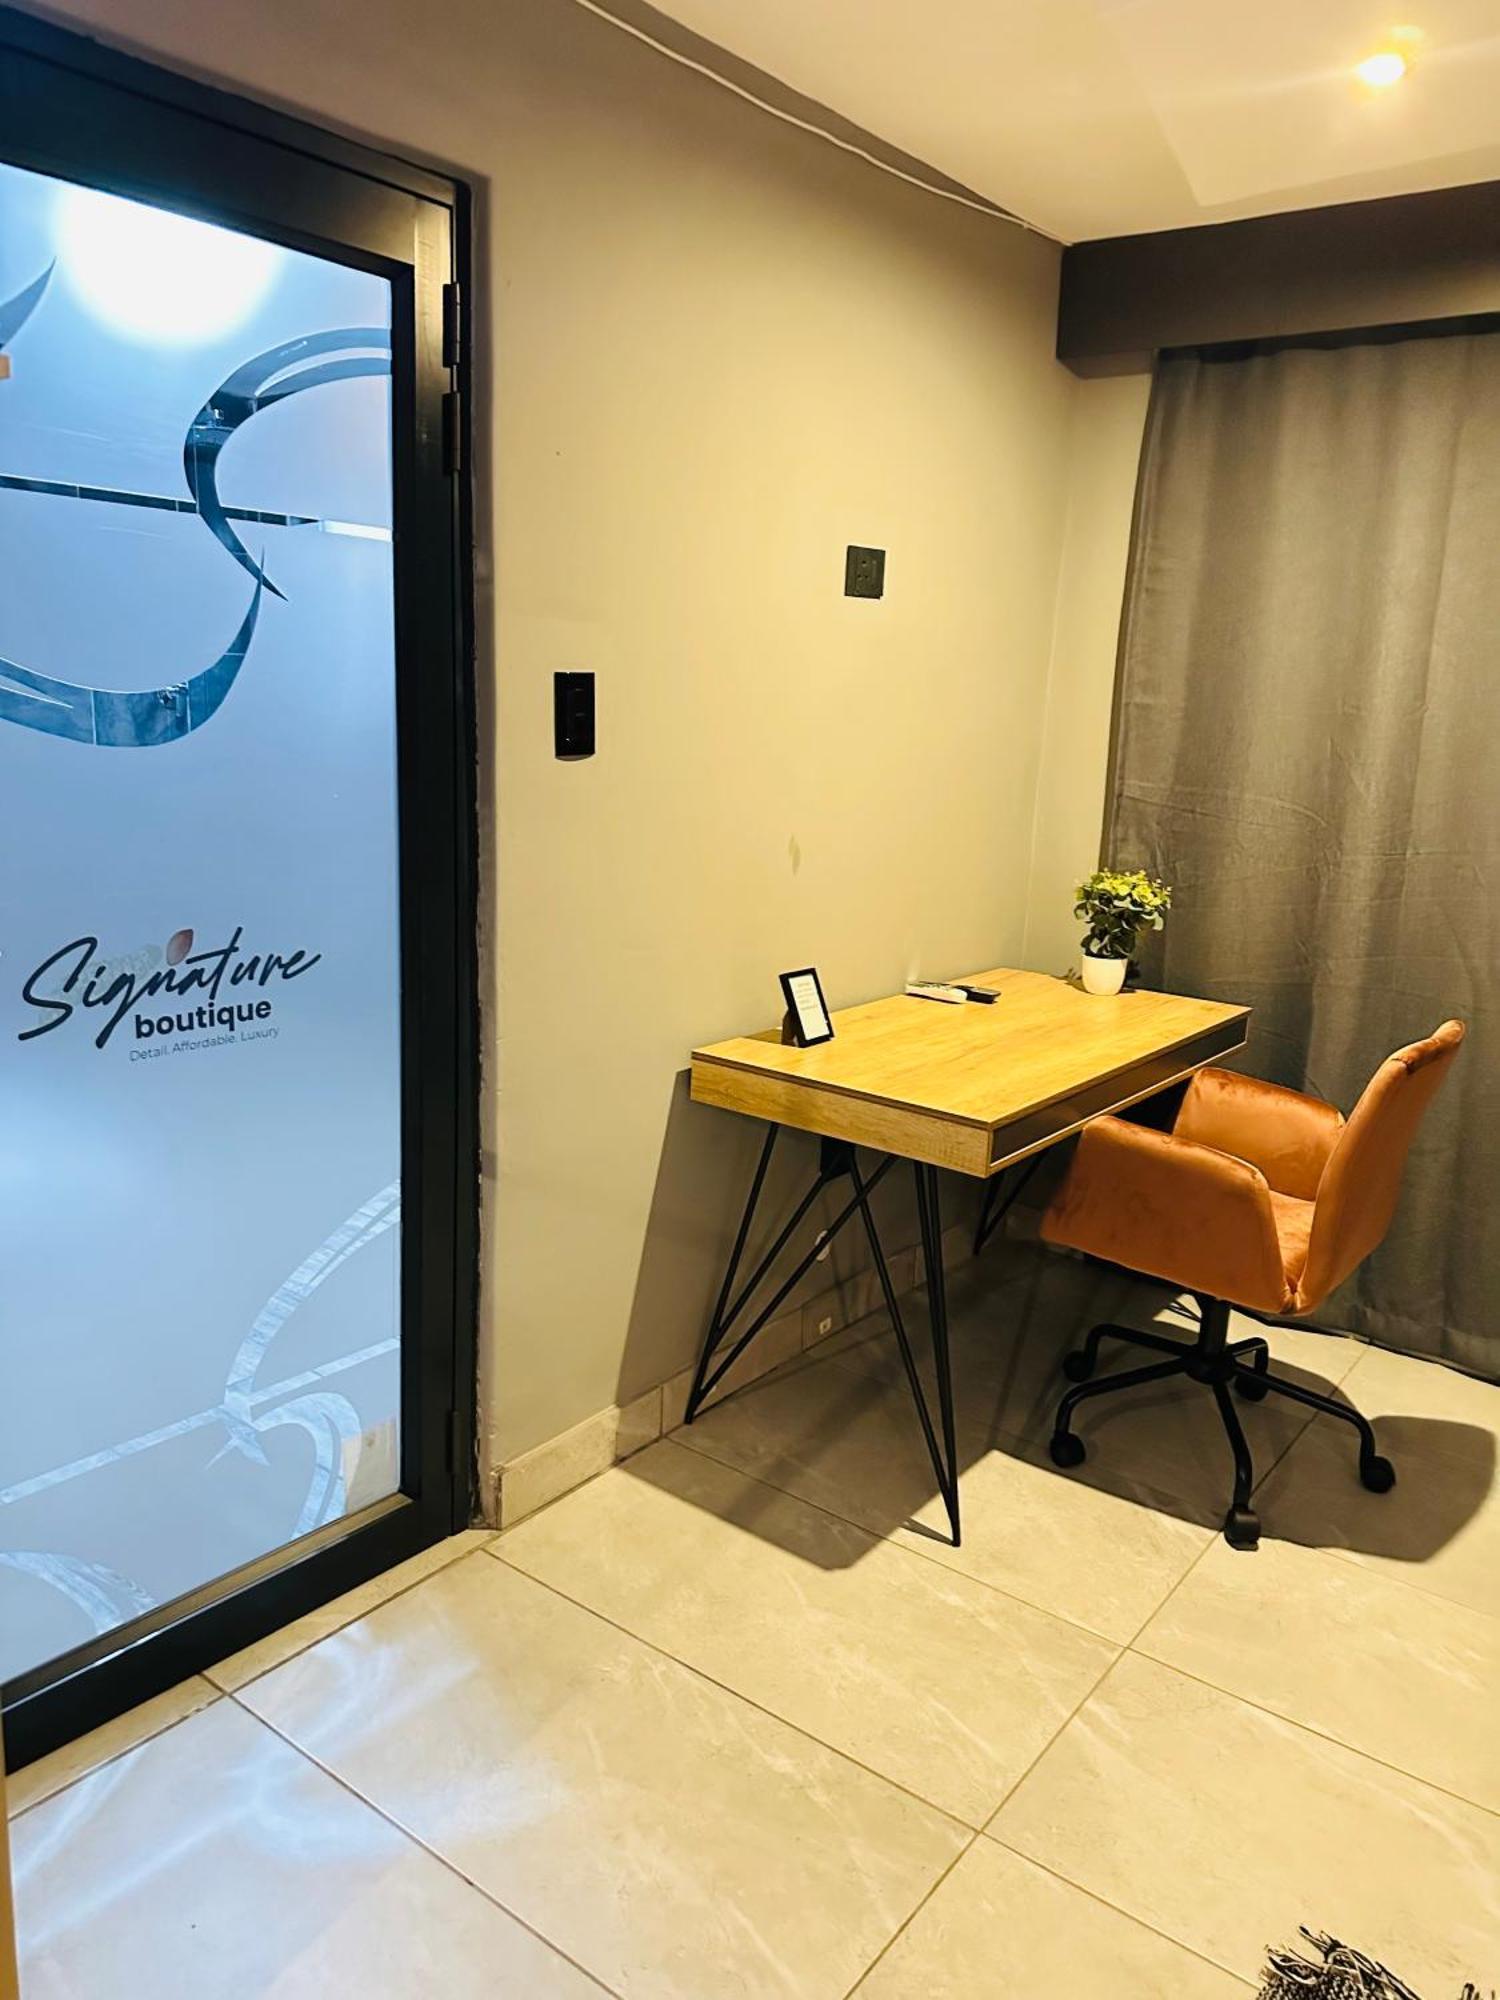 Signature Boutique Guesthouse 马翁 外观 照片